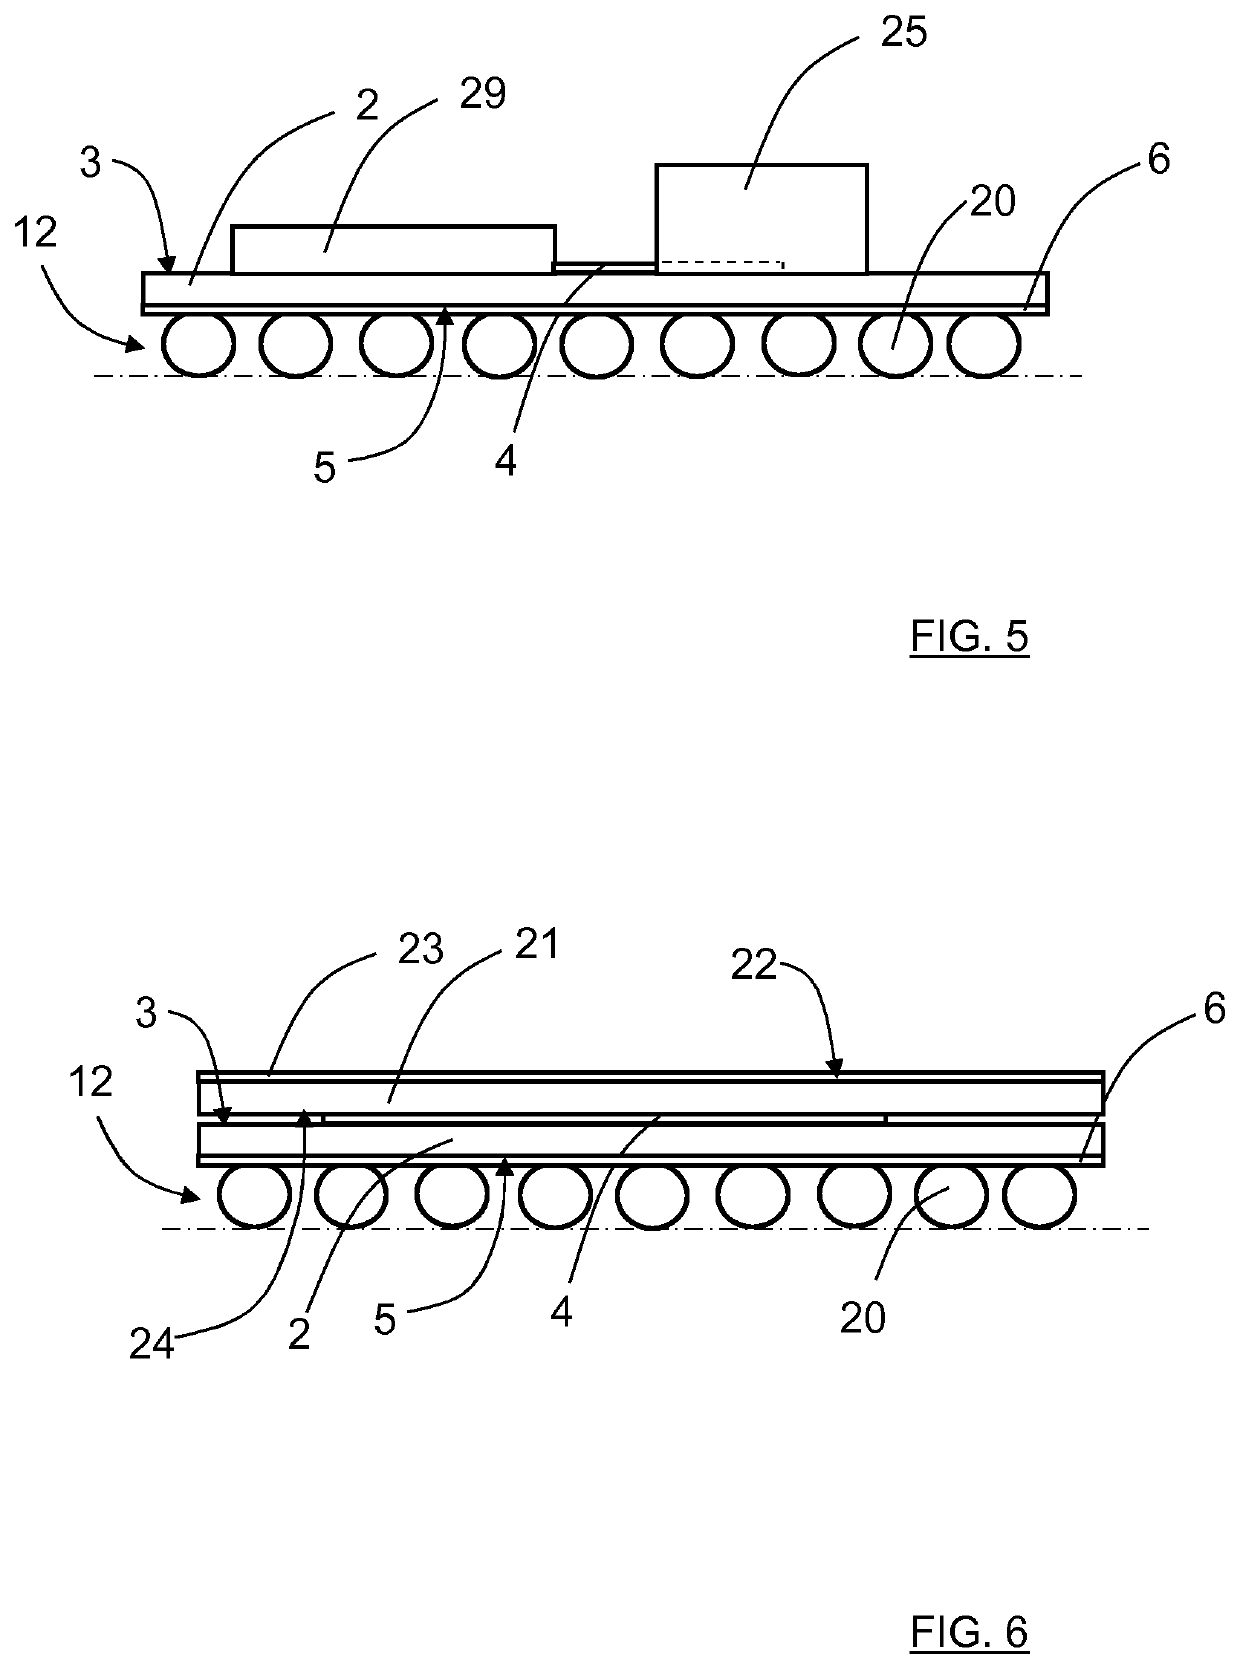 Waveguide transition comprising a feed probe coupled to a waveguide section through a waveguide resonator part